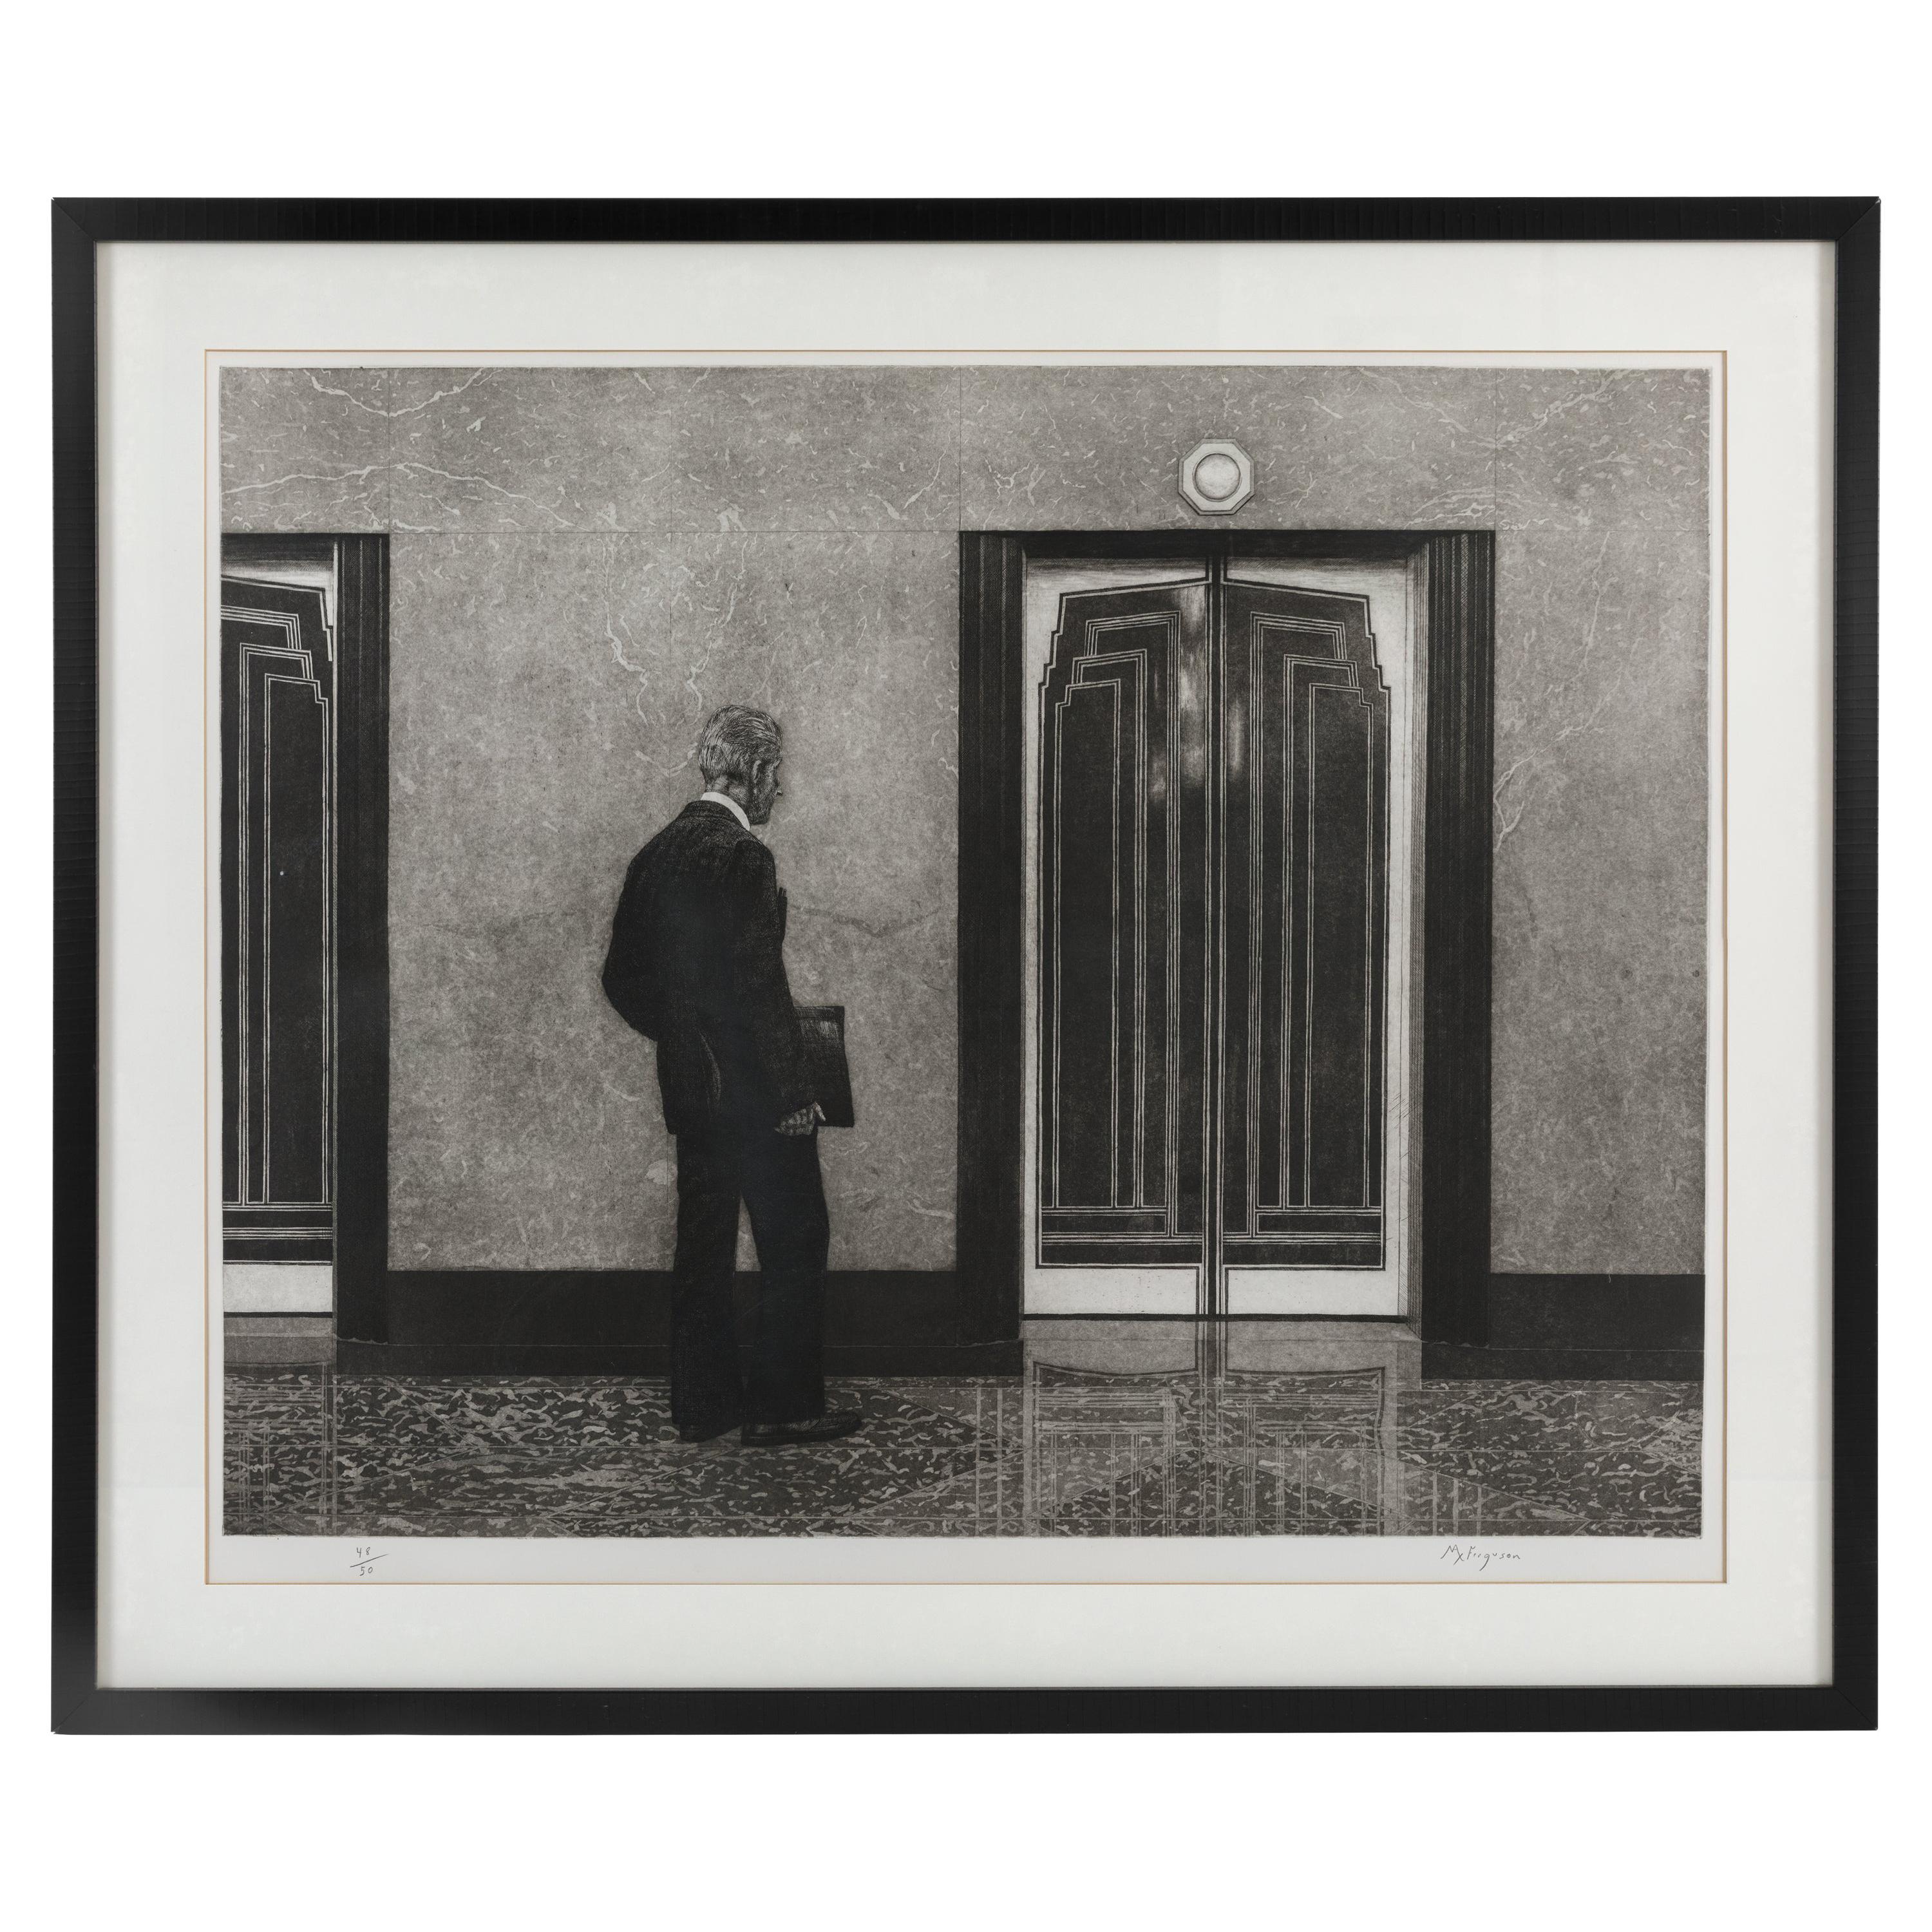 Etching of Man at Empire State Building Elevator by Max Ferguson, USA, 1980s